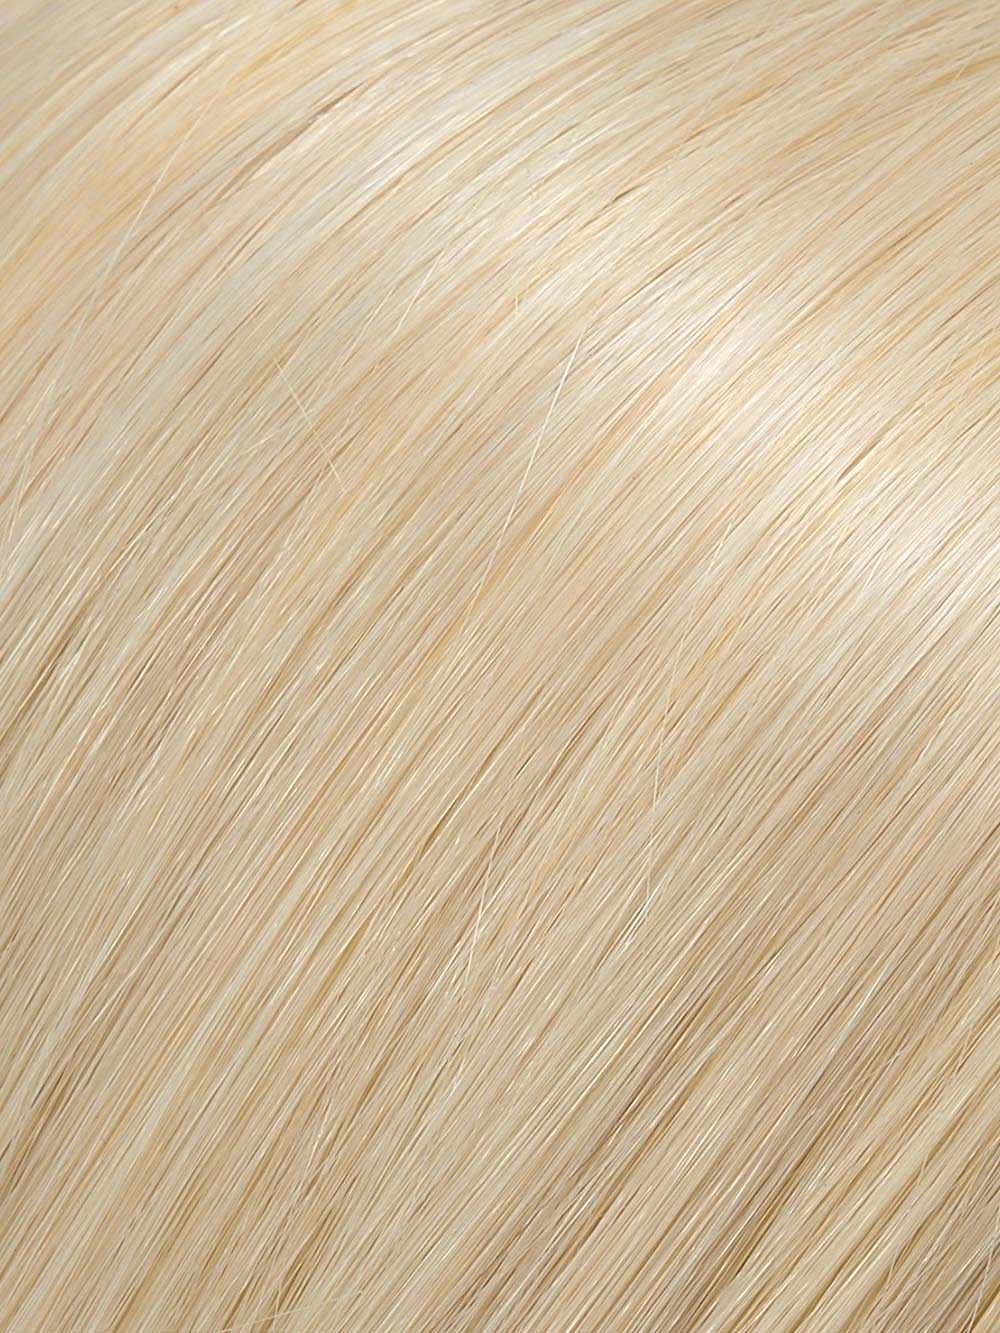 613 WHITE CHOCOLATE | Pale Natural Gold Blonde